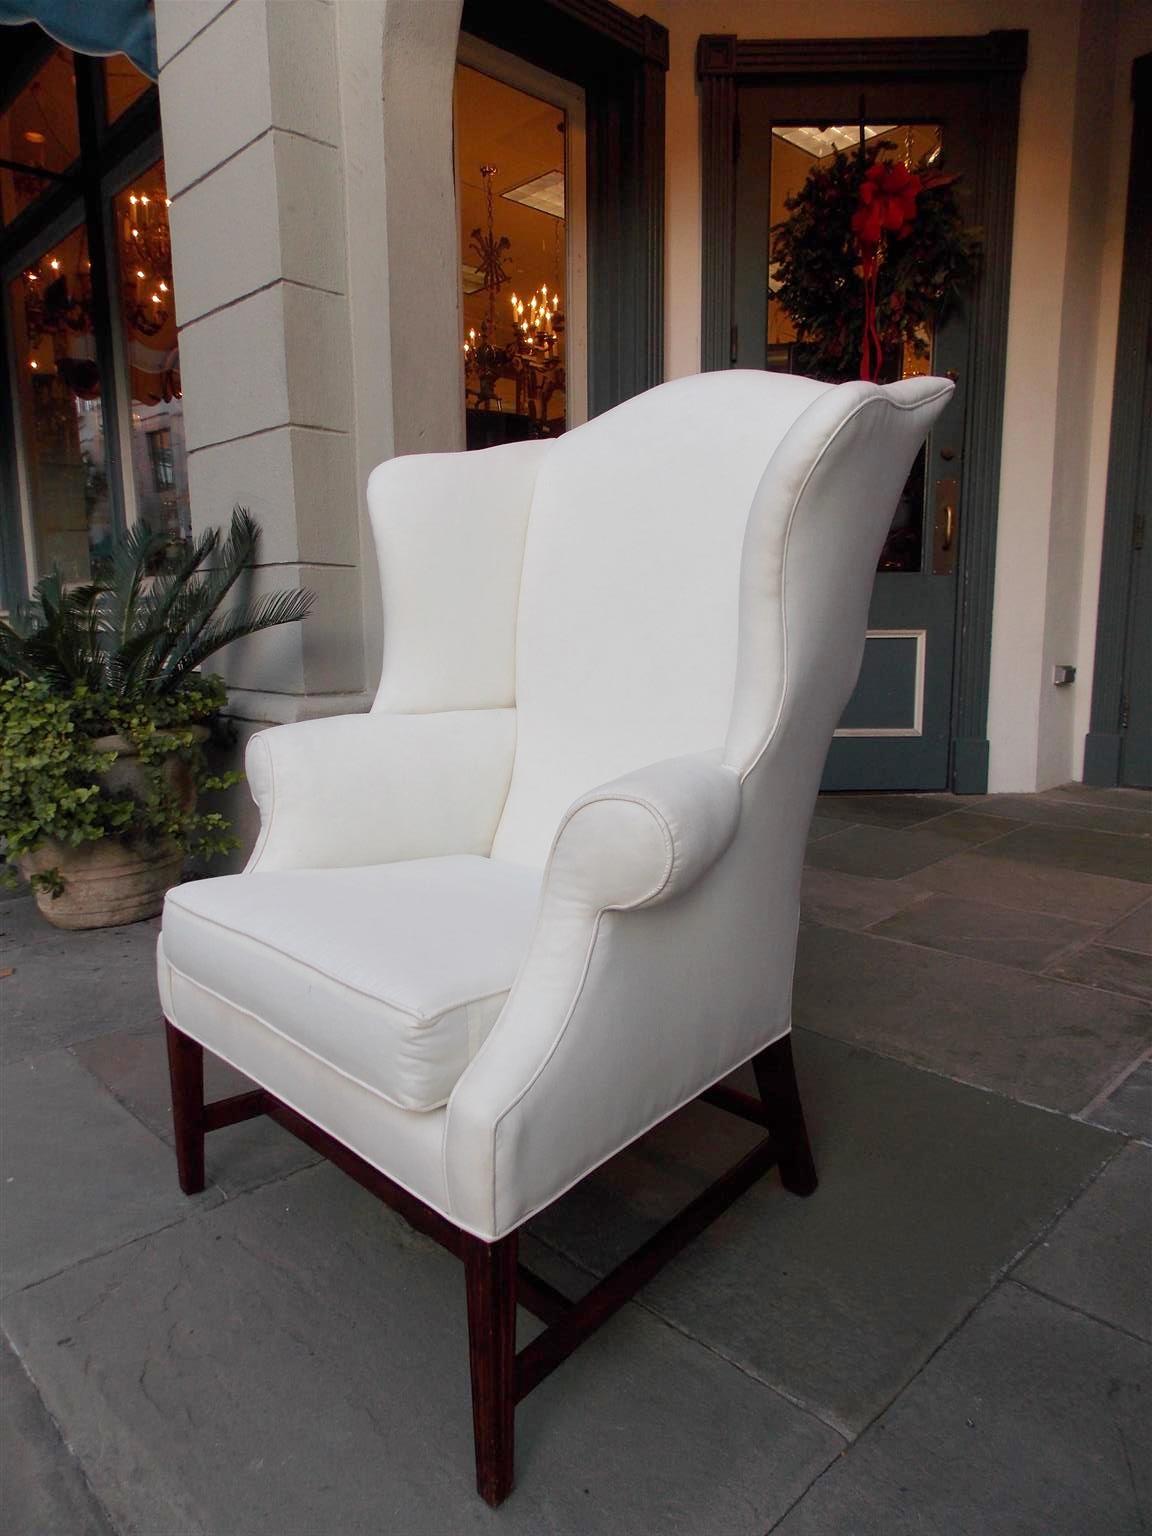 American Hepplewhite Mahogany Upholstered Wing Back Chair, New York, Circa 1790 im Zustand „Hervorragend“ in Hollywood, SC